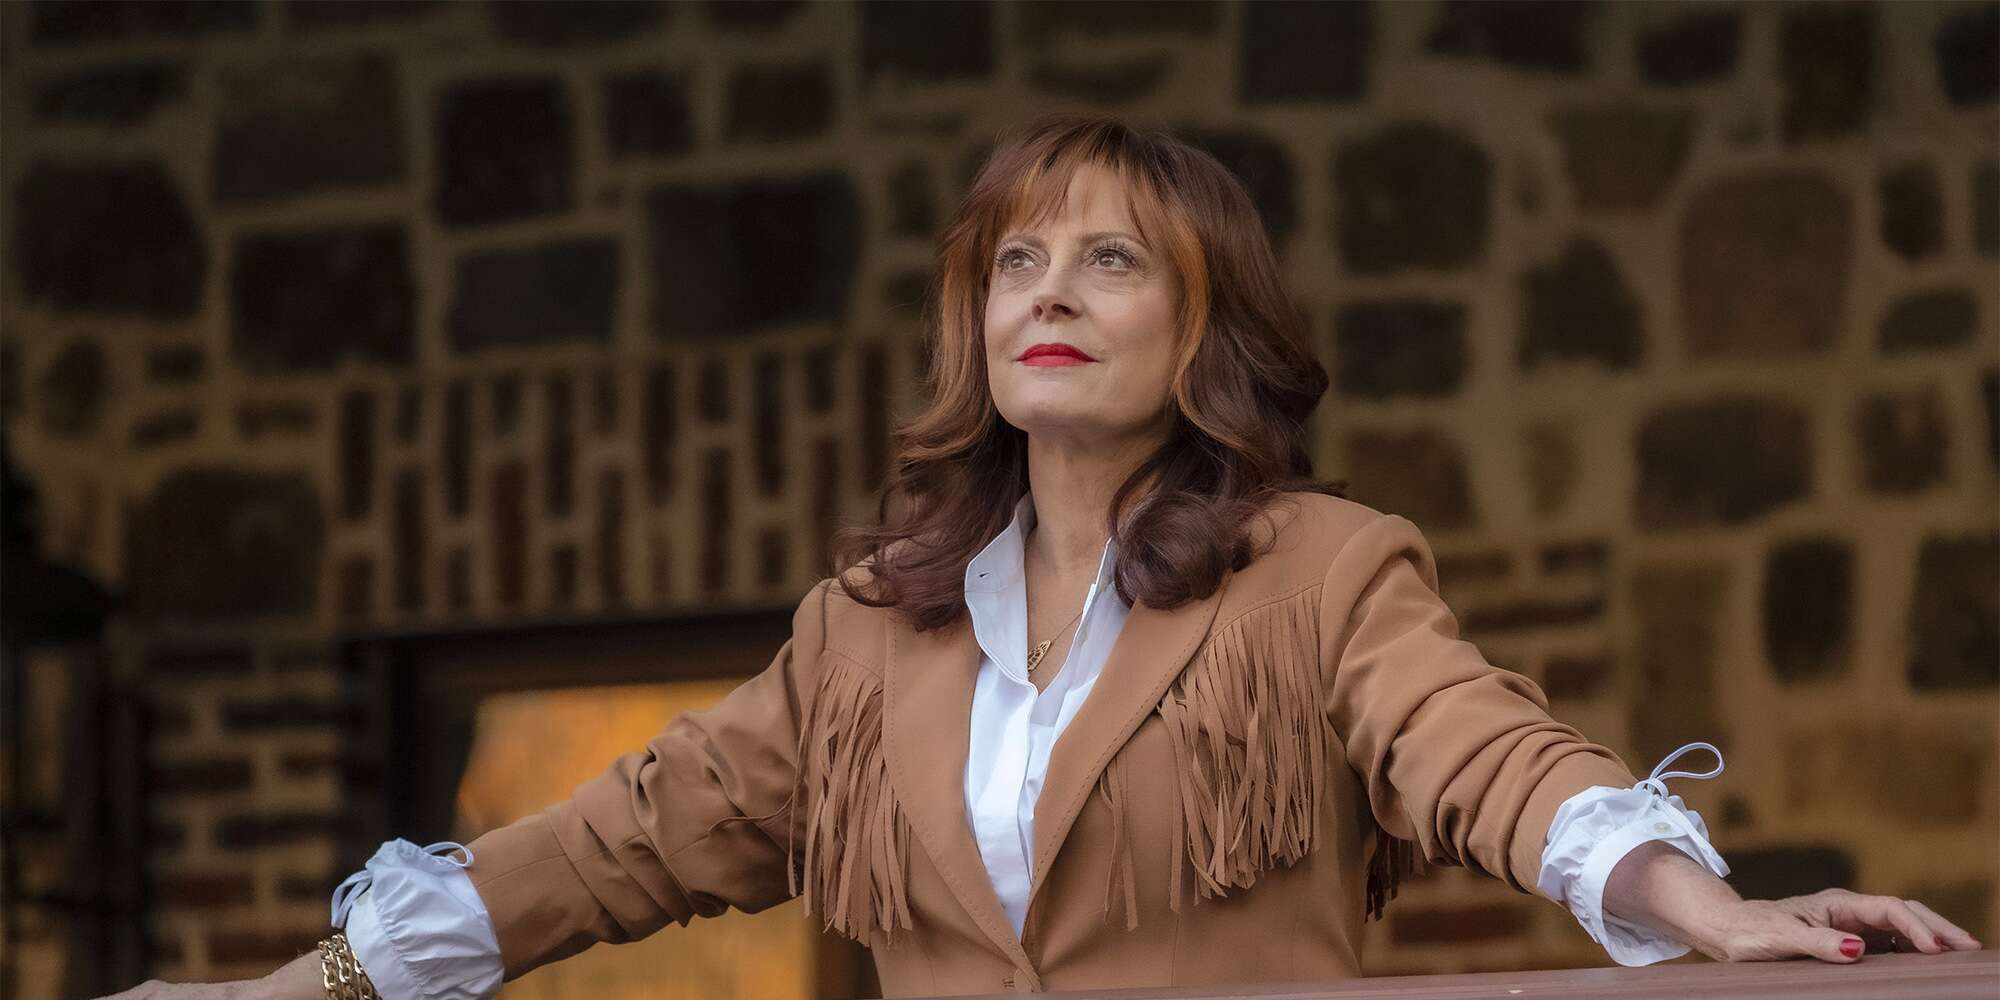 Susan Sarandon loses her crown as Fox cancels country music drama Monarch after 1 season